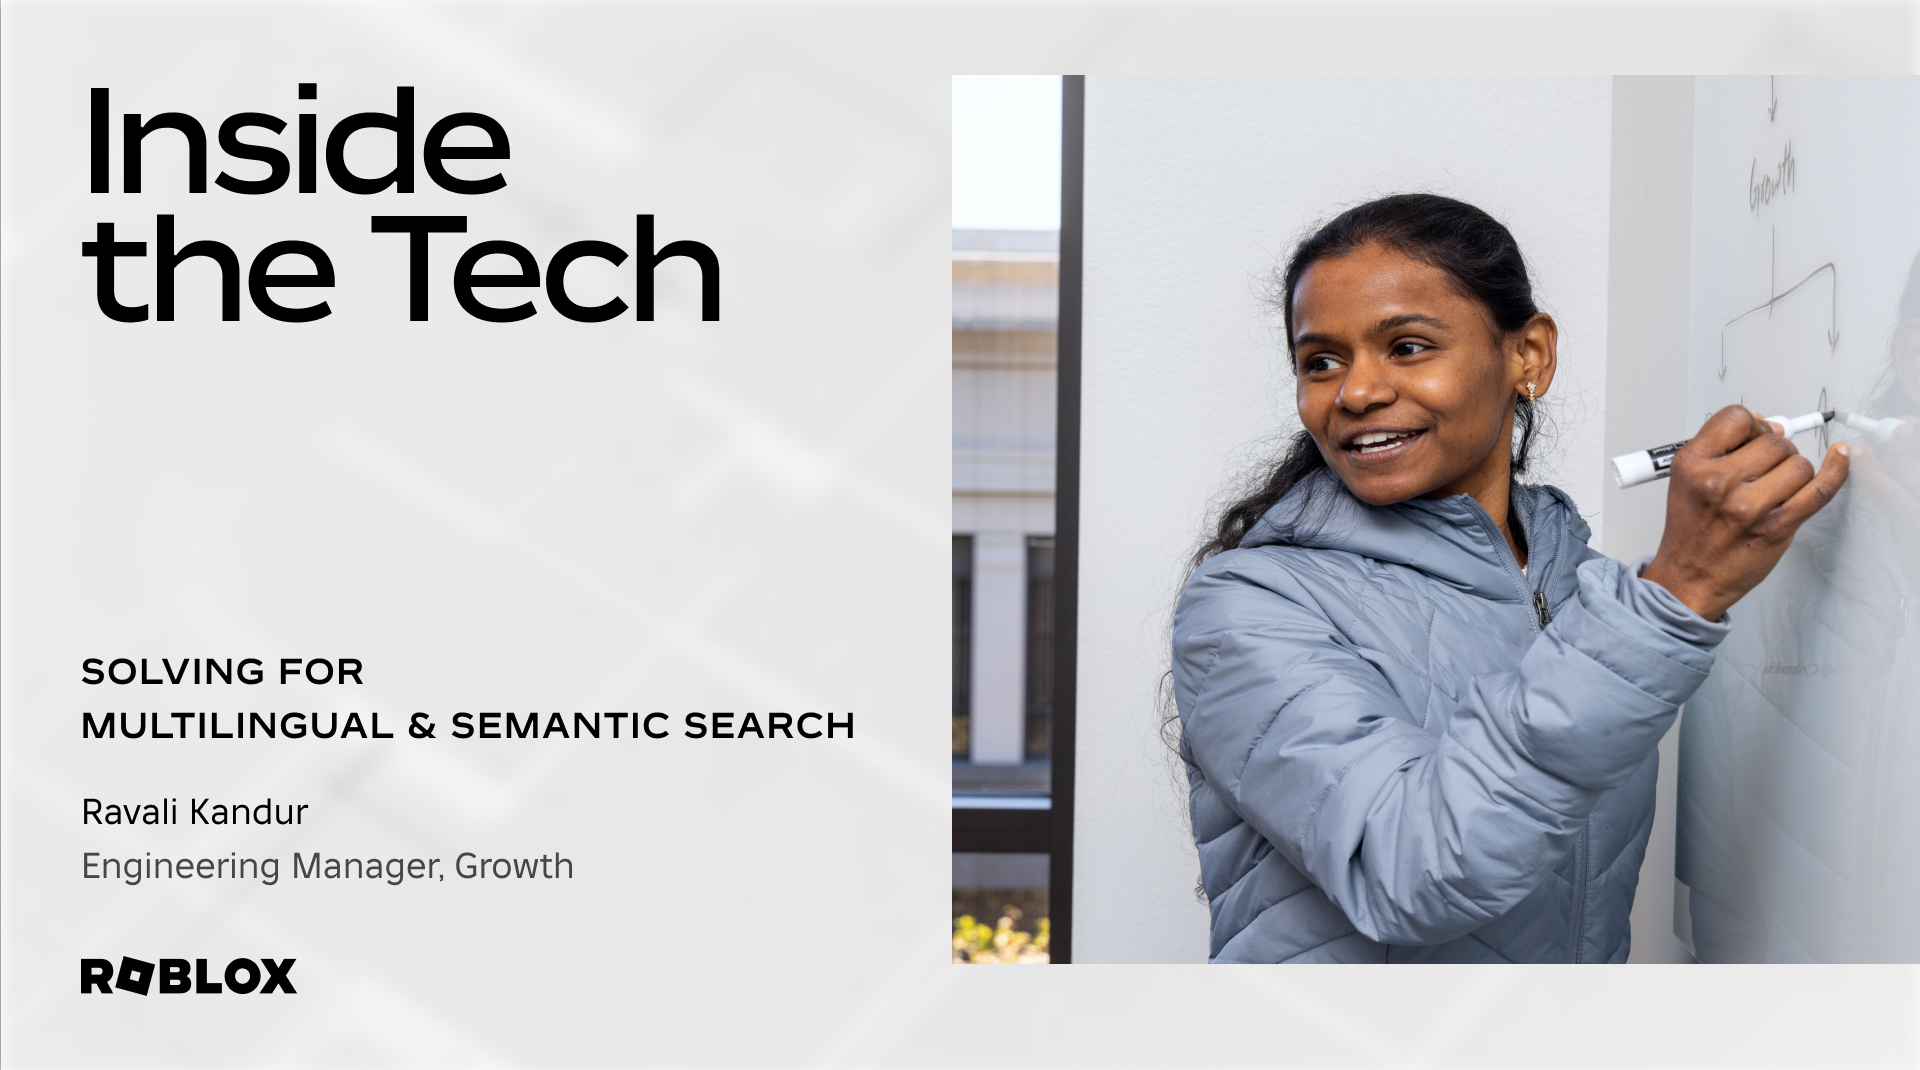 Inside the Tech is a blog series that accompanies our Tech Talks Podcast. In this edition of Inside the Tech, we talked with Engineering Manager Ravali Kandur to learn more about one of those technical challenges-multilingual and semantic search, and how the Growth team's work is helping Roblox users across the globe search for-and quickly find-anything they want on our platform.